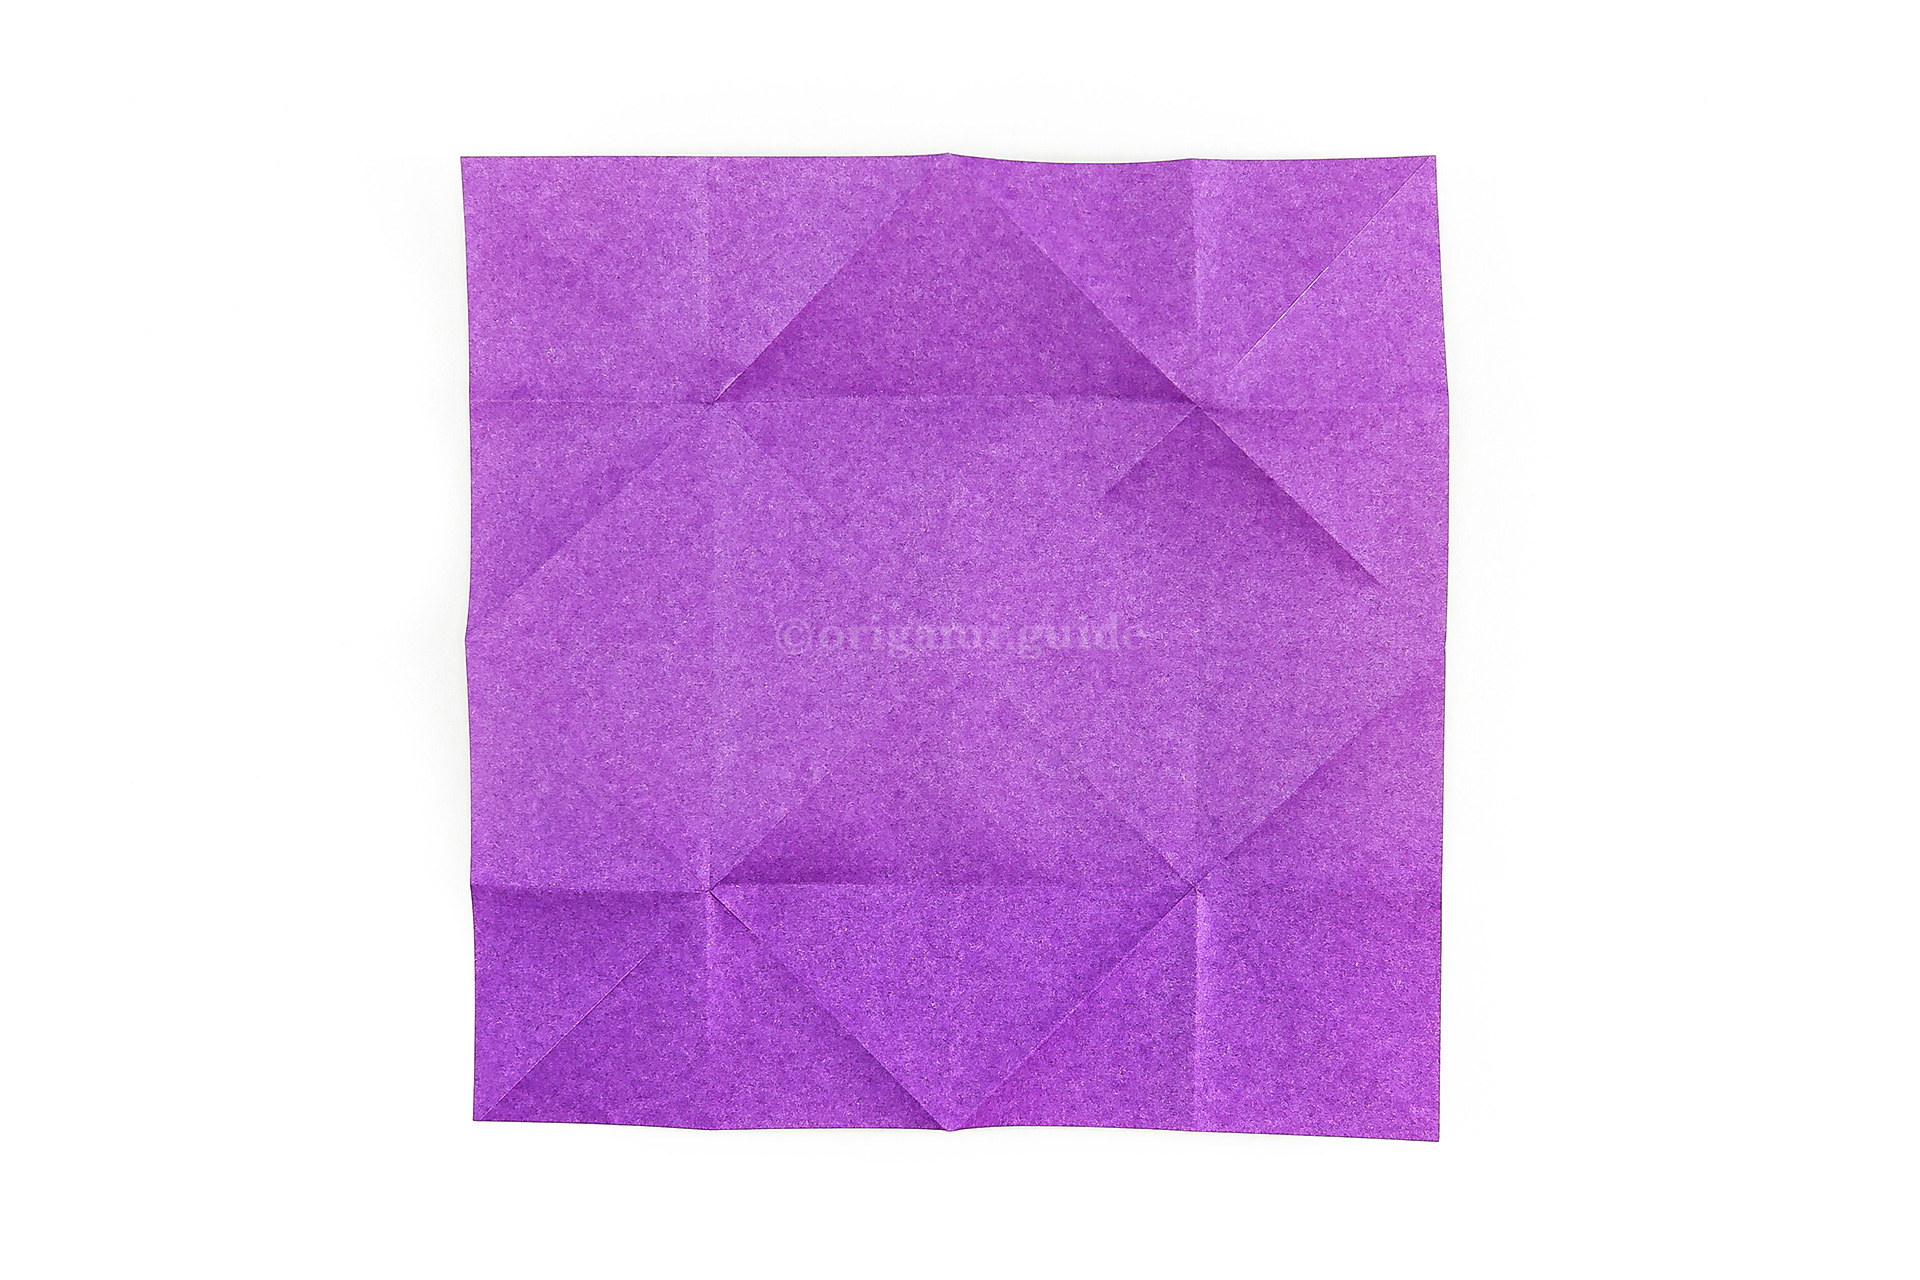 Unfold the paper completely.